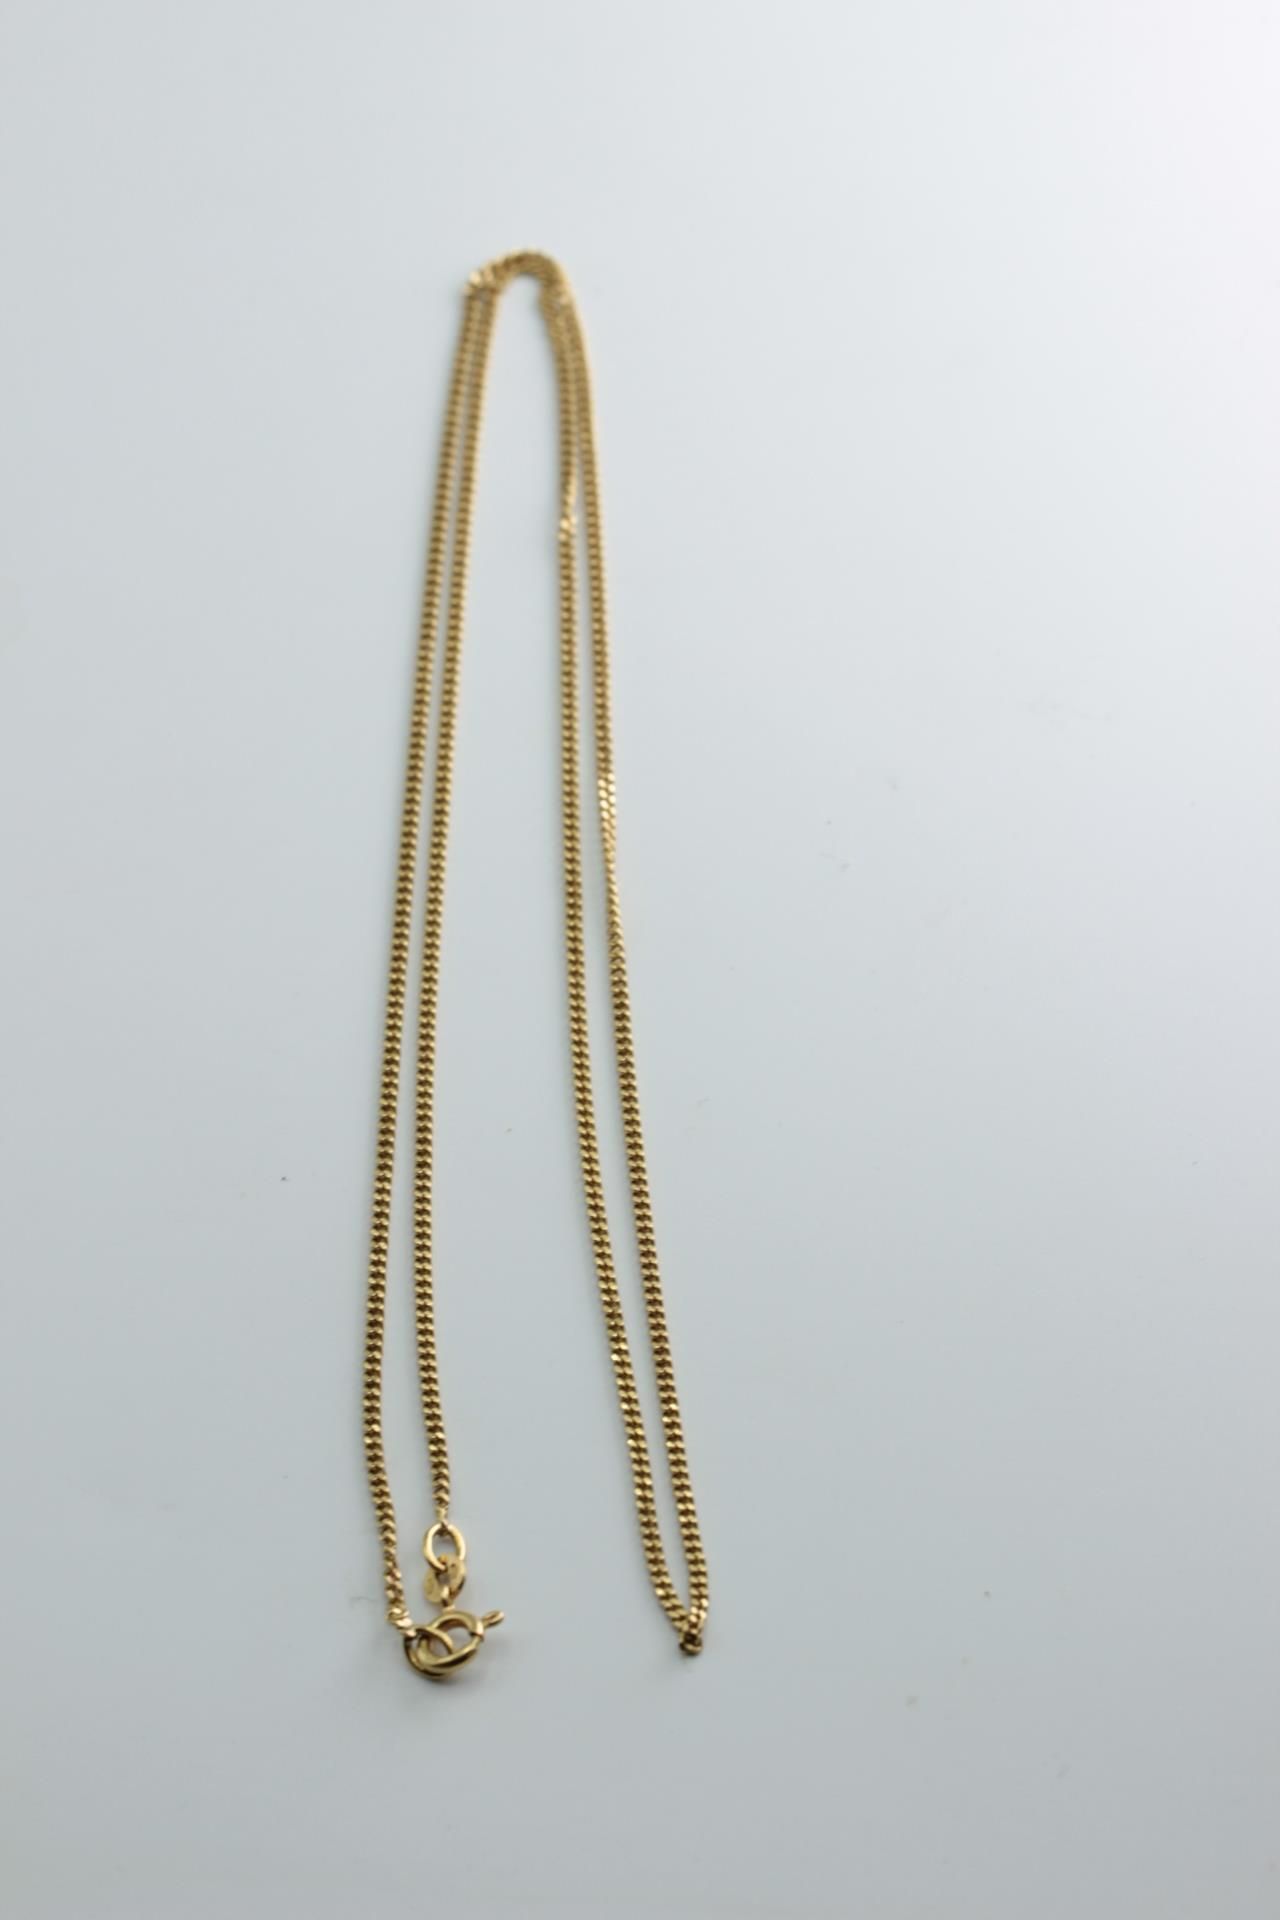 Necklace / Chain / Flat Curb Chain 62cm 24.4 inches - Image 2 of 5